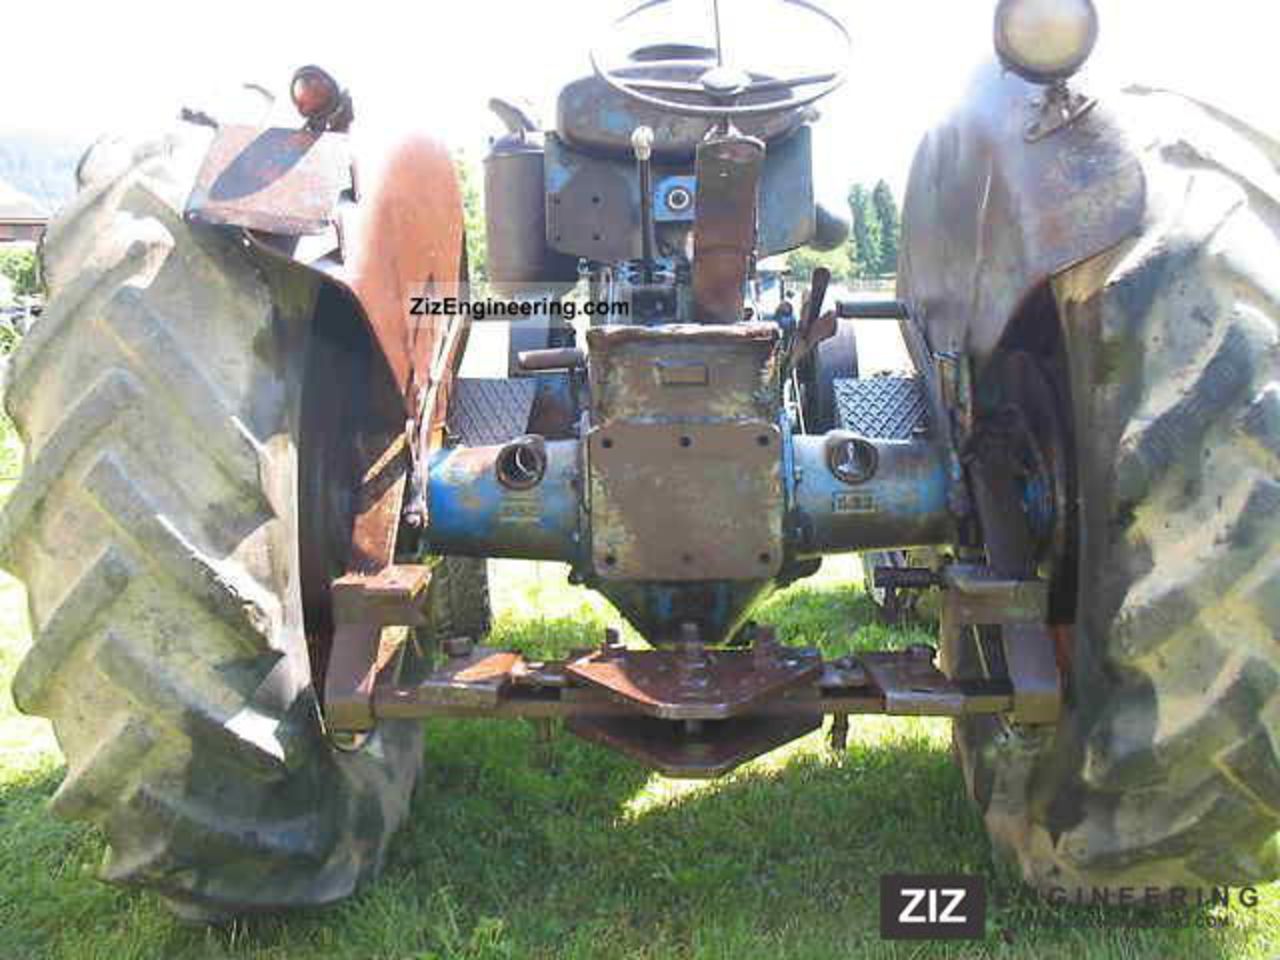 Landini L 25 Testacalda 1953 Agricultural Tractor Photo and Specs